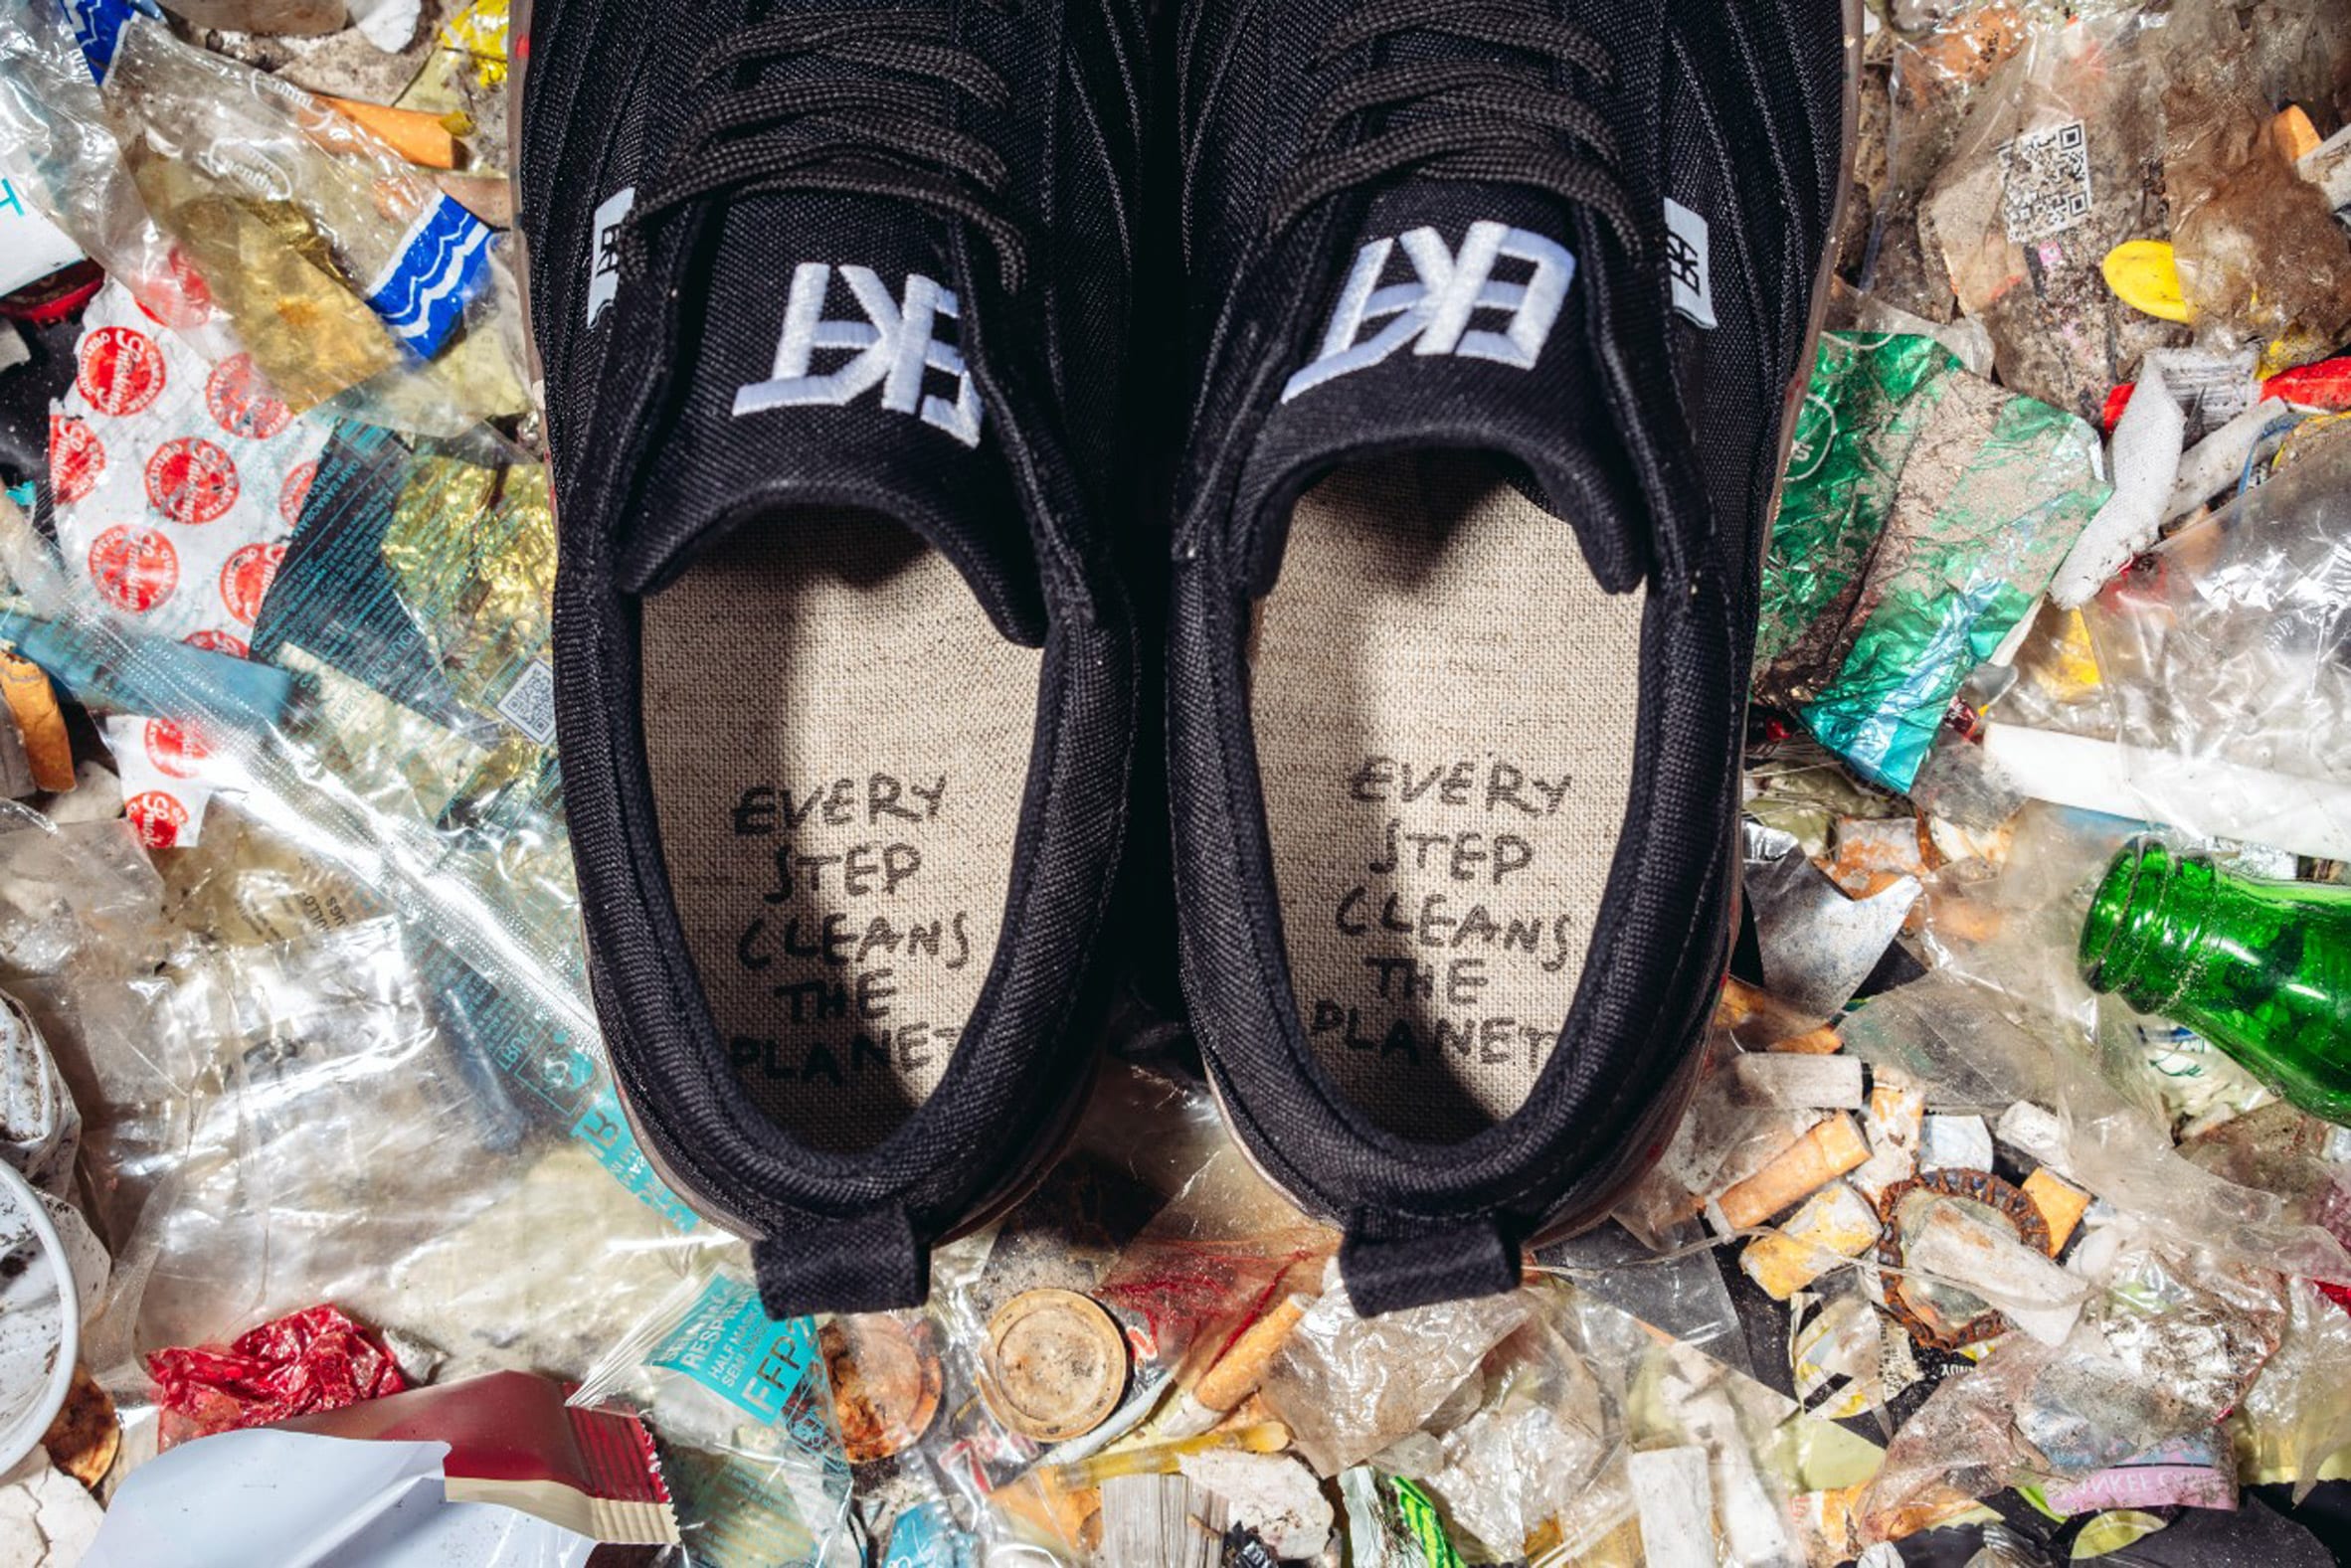 A pair of trainers with the phrase "Every step cleans the planet" written inside